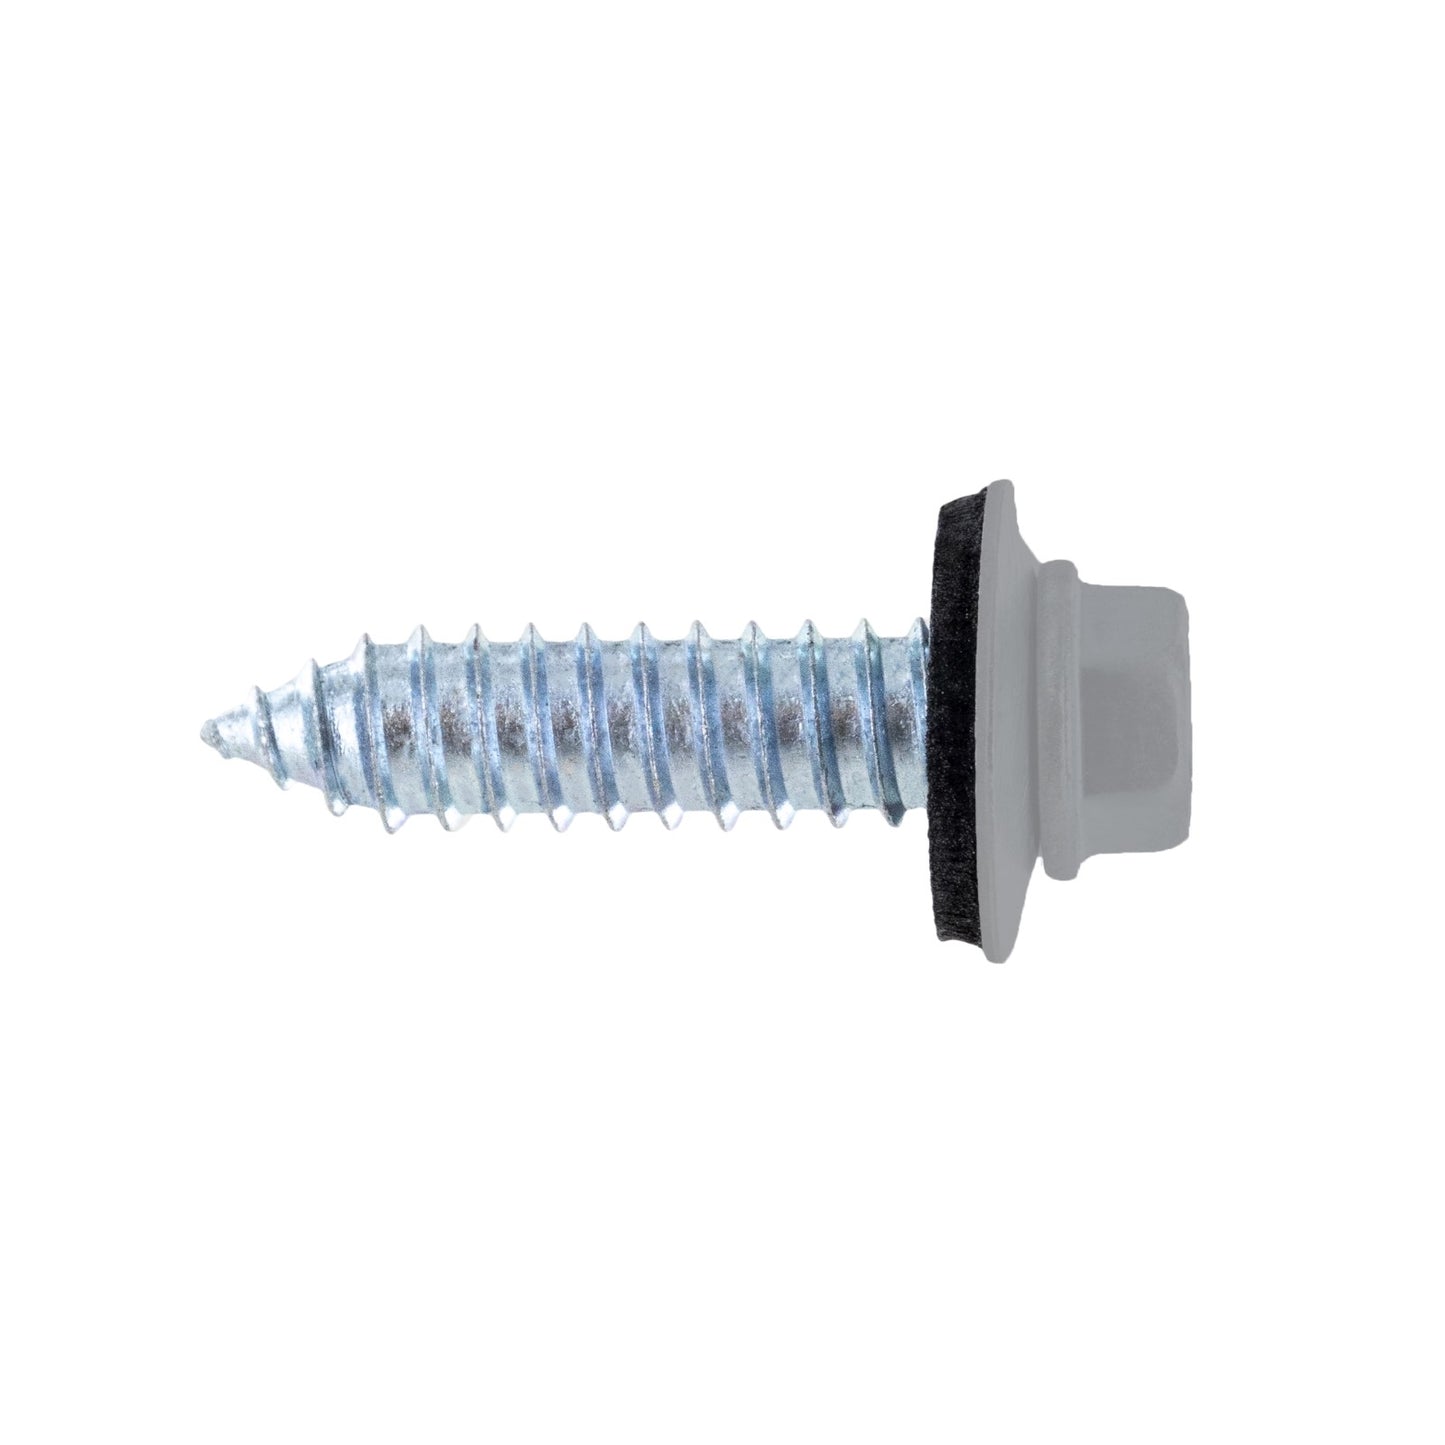 #17 x 1" Tapping Steelbinder Metal Roofing Screw - Light Gray - Pkg 250